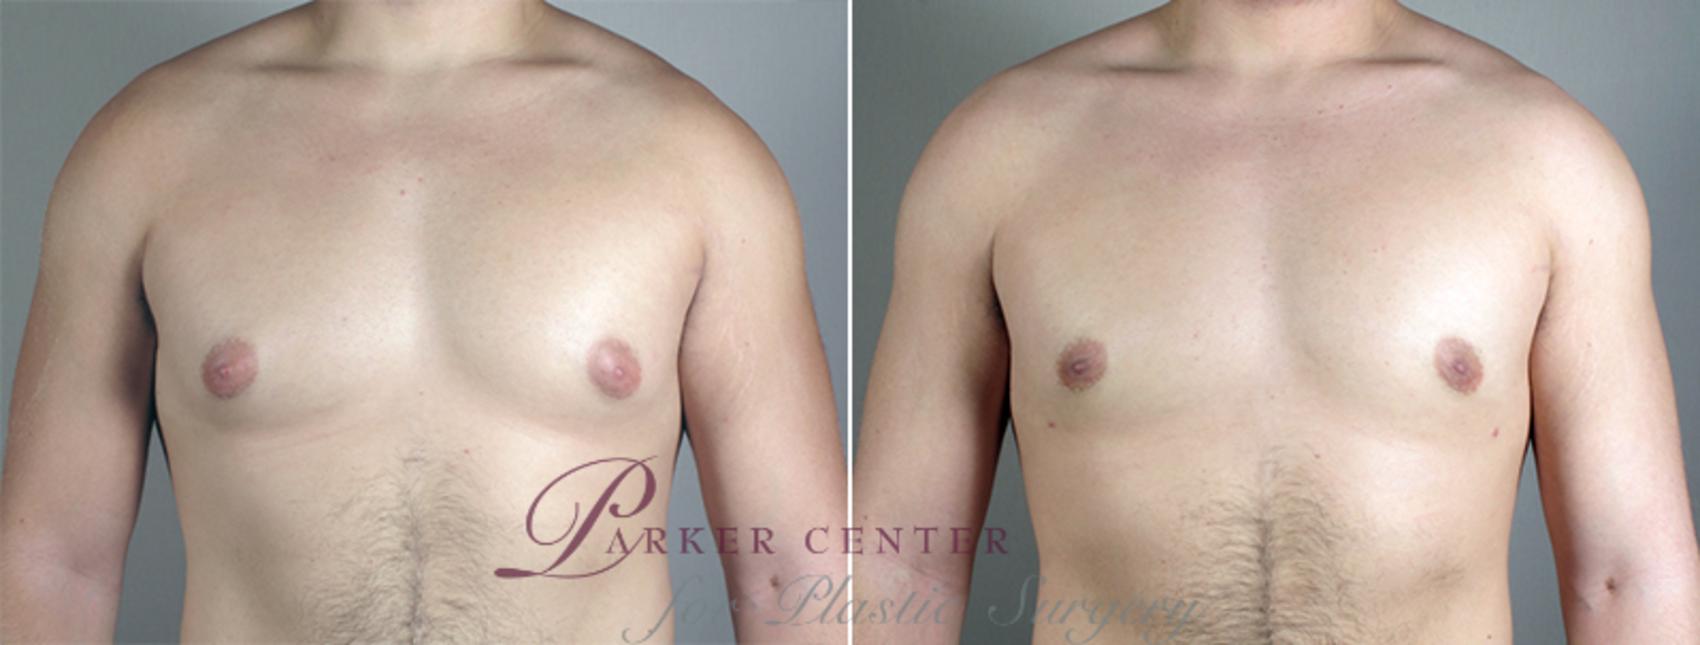 Gynecomastia Surgery Before and After Pictures Case 635 | Paramus, NJ | Parker Center for Plastic Surgery